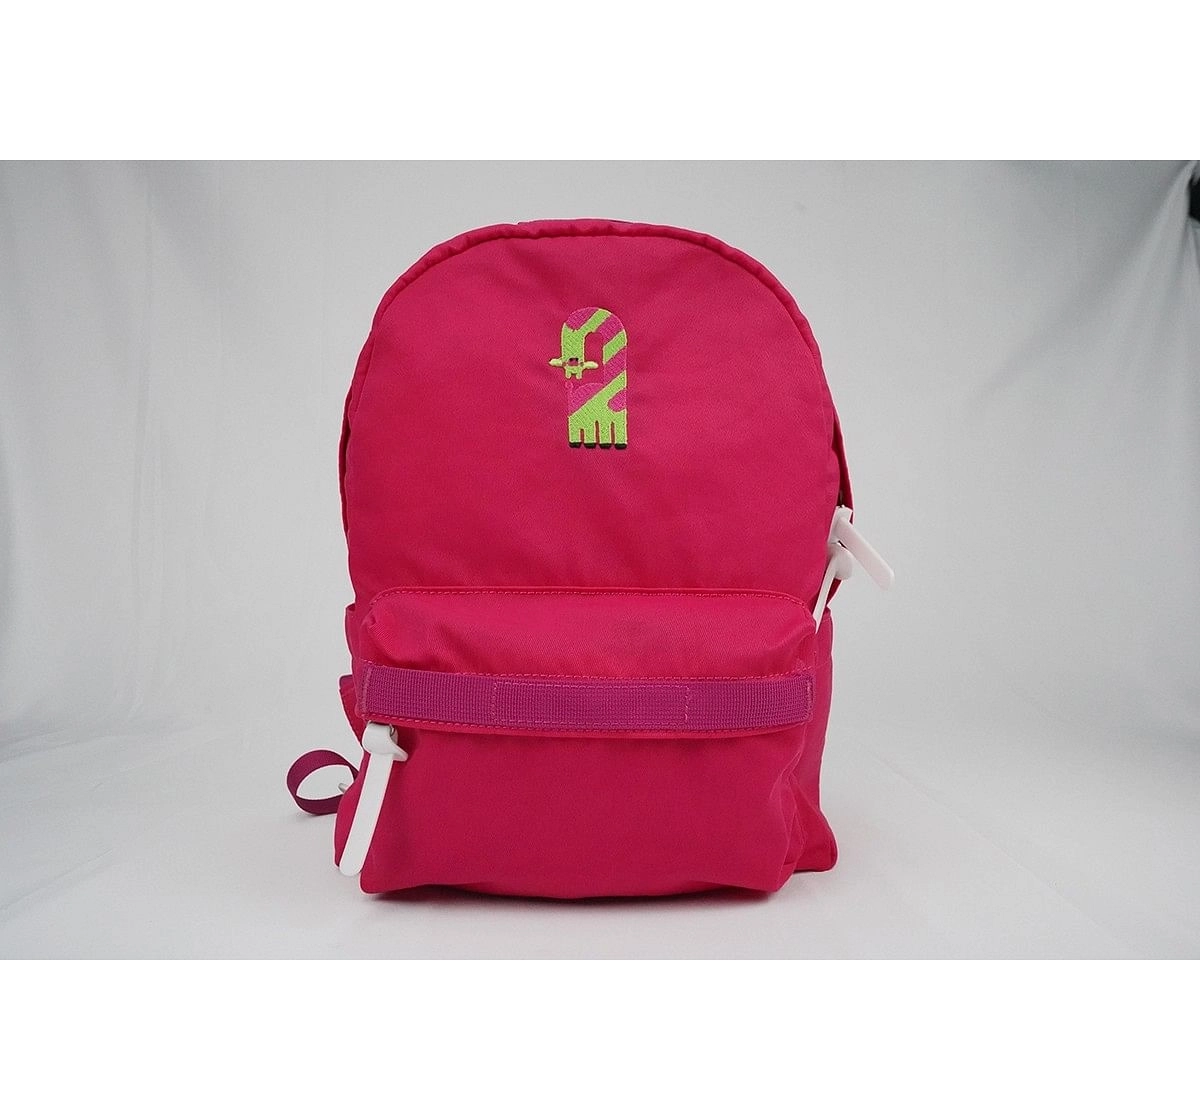 Zoozi Friends Backpack for Kids age 3Y+ (Pink)